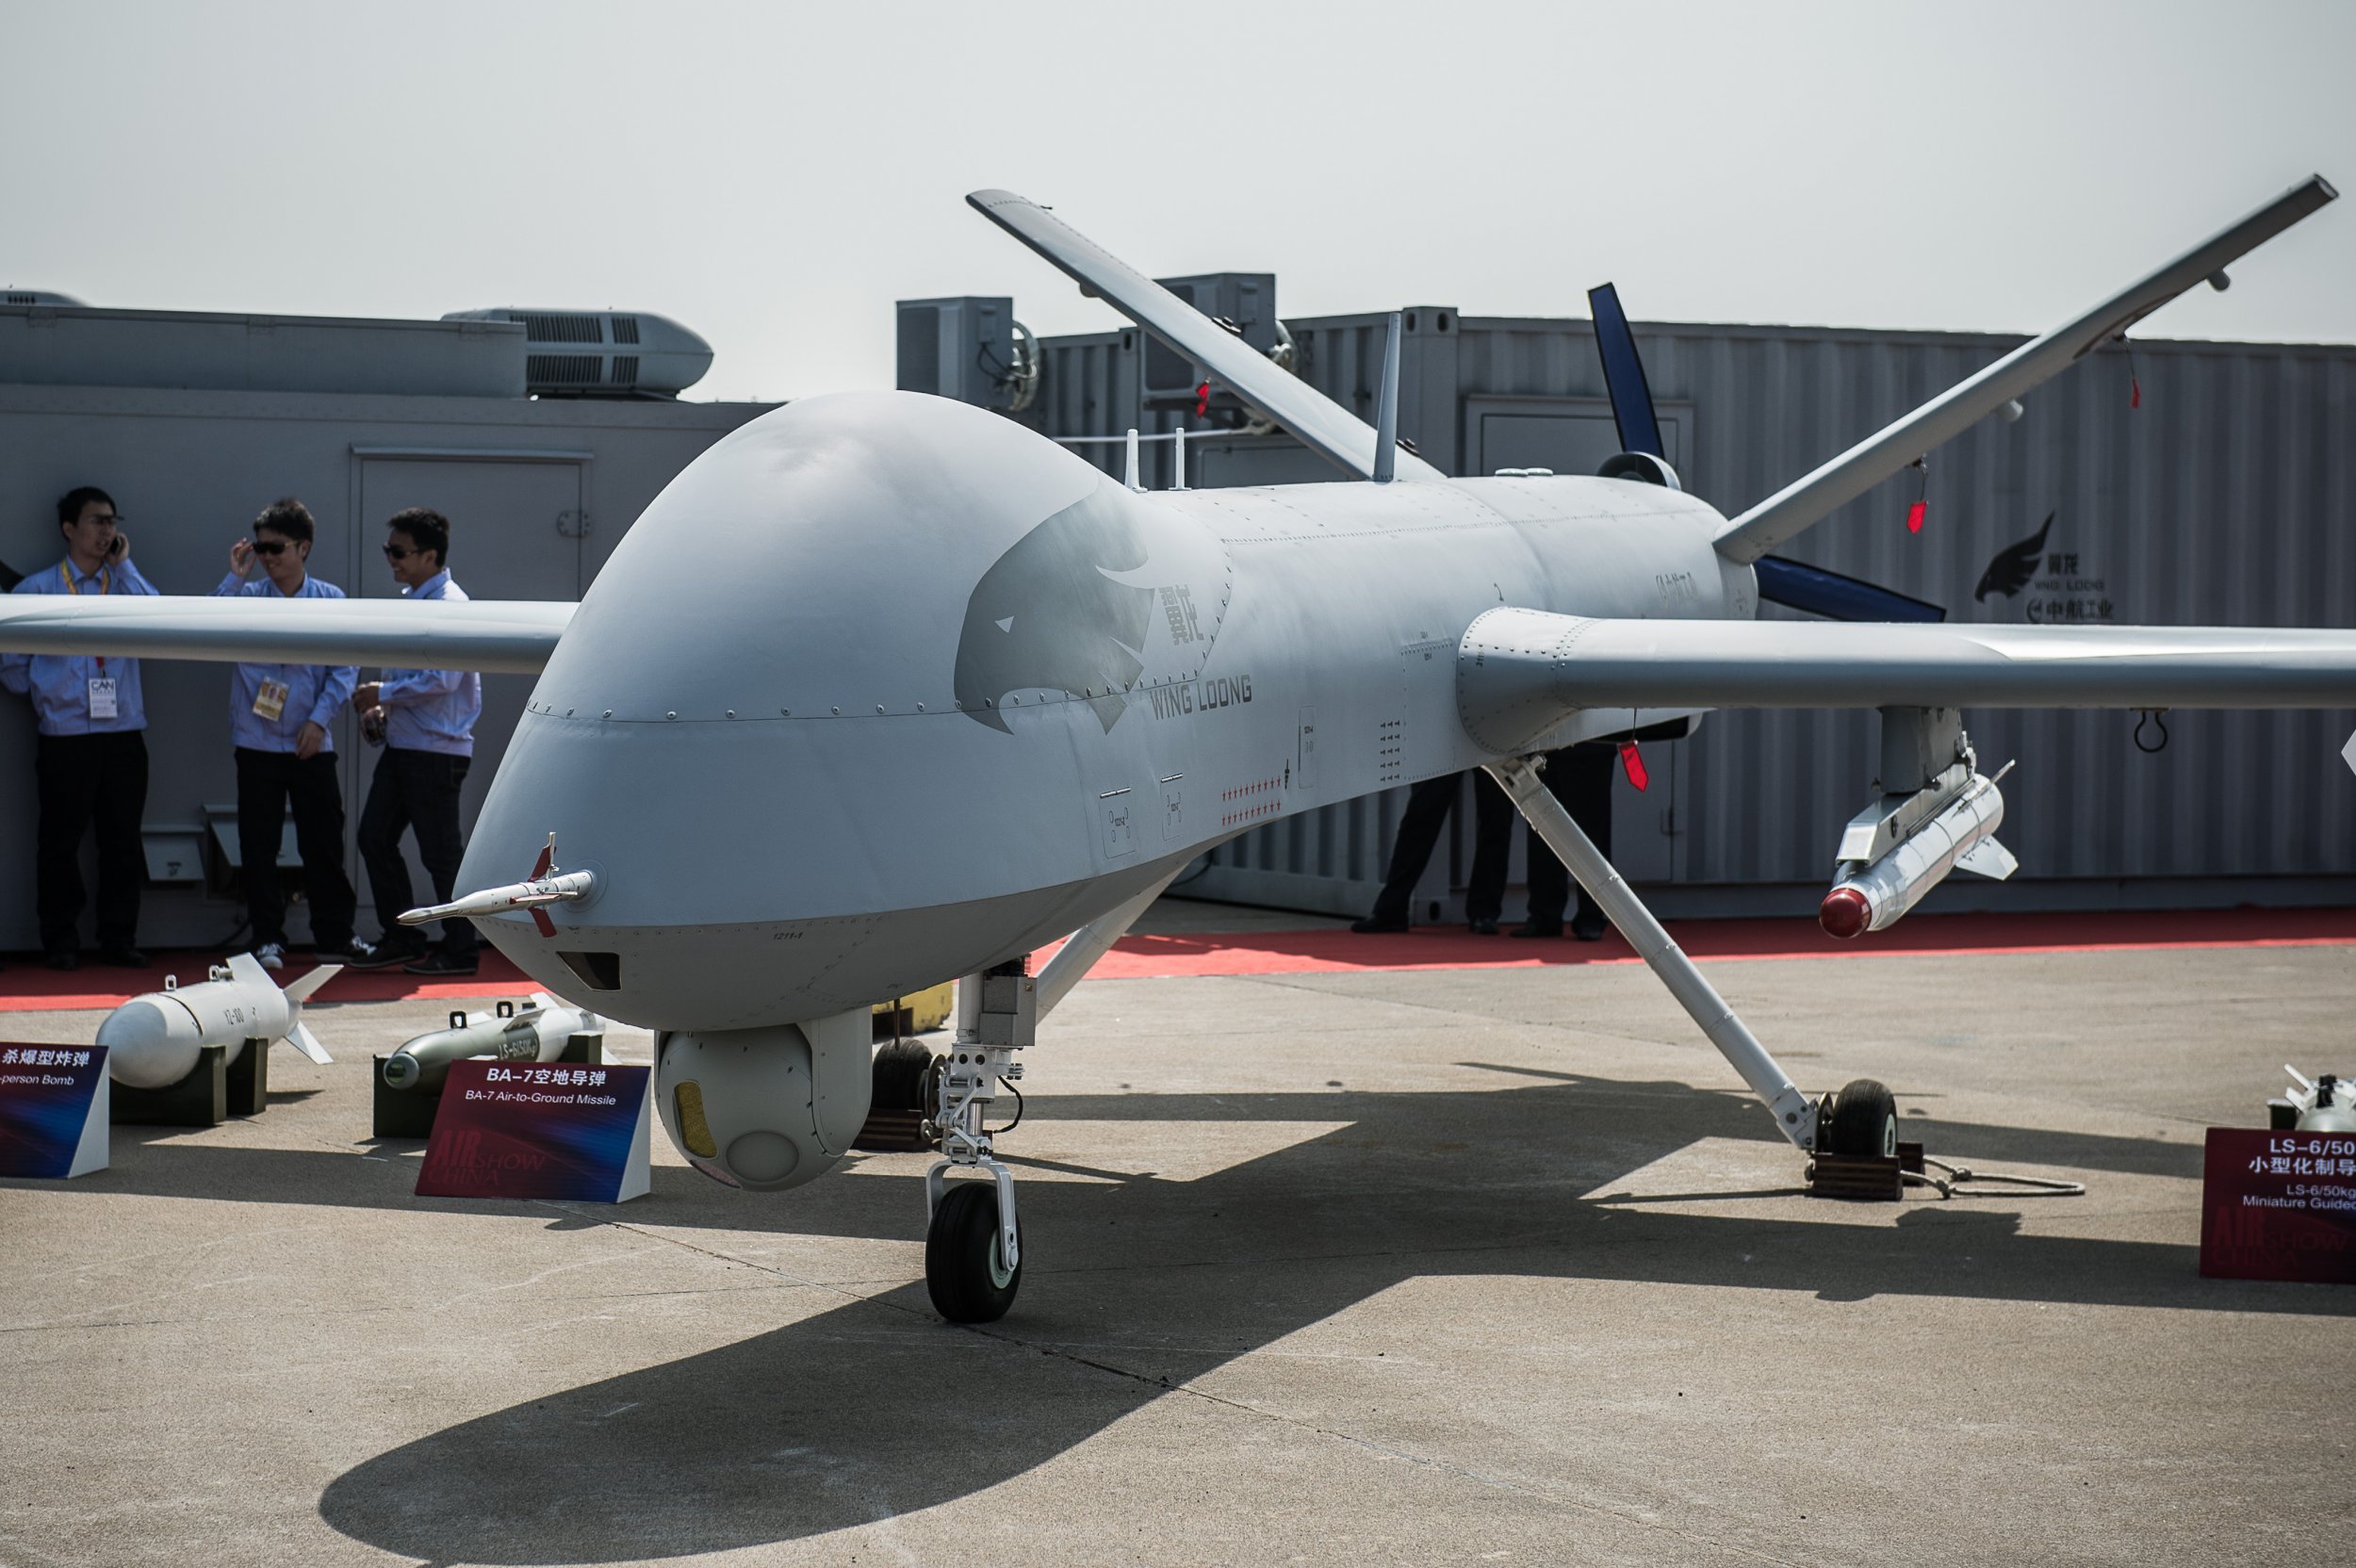 underskud skelet bryst Game of Drones: China Ramps Up Development to Challenge U.S. Dominance